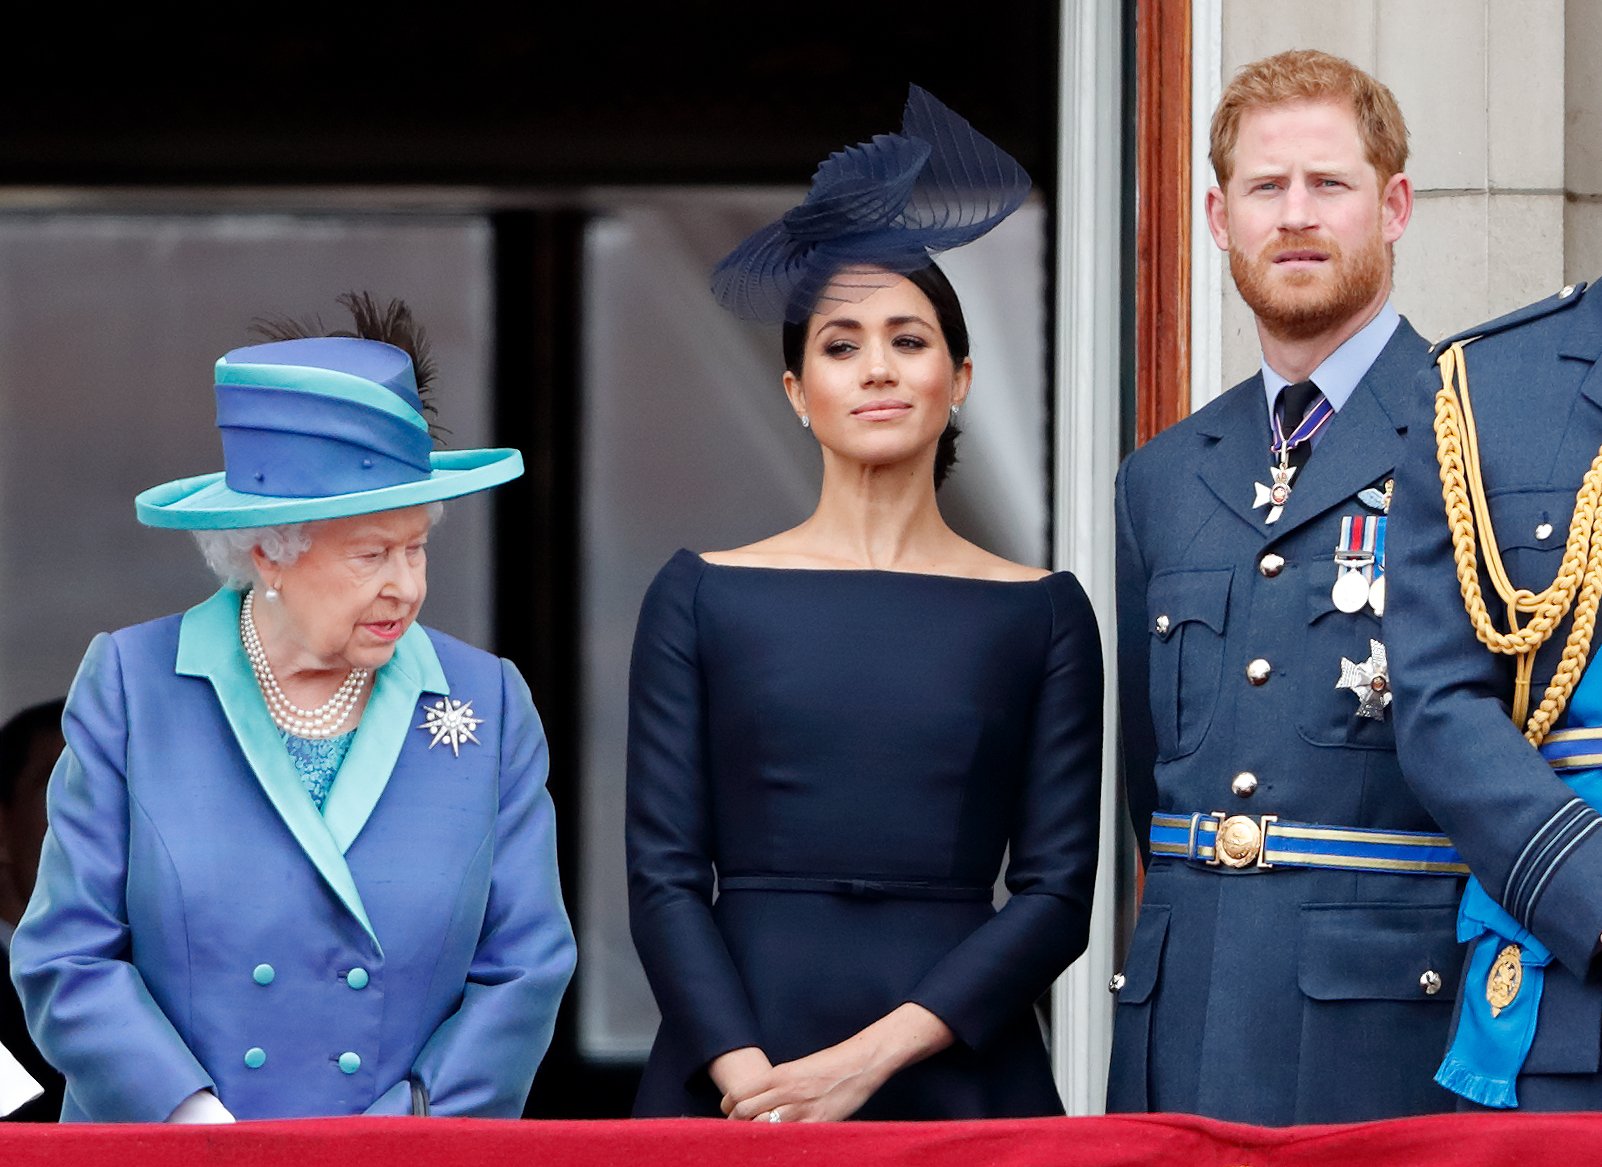 Queen Elizabeth II, Meghan Markle, and Prince Harry standing on the balcony of Buckingham Palace